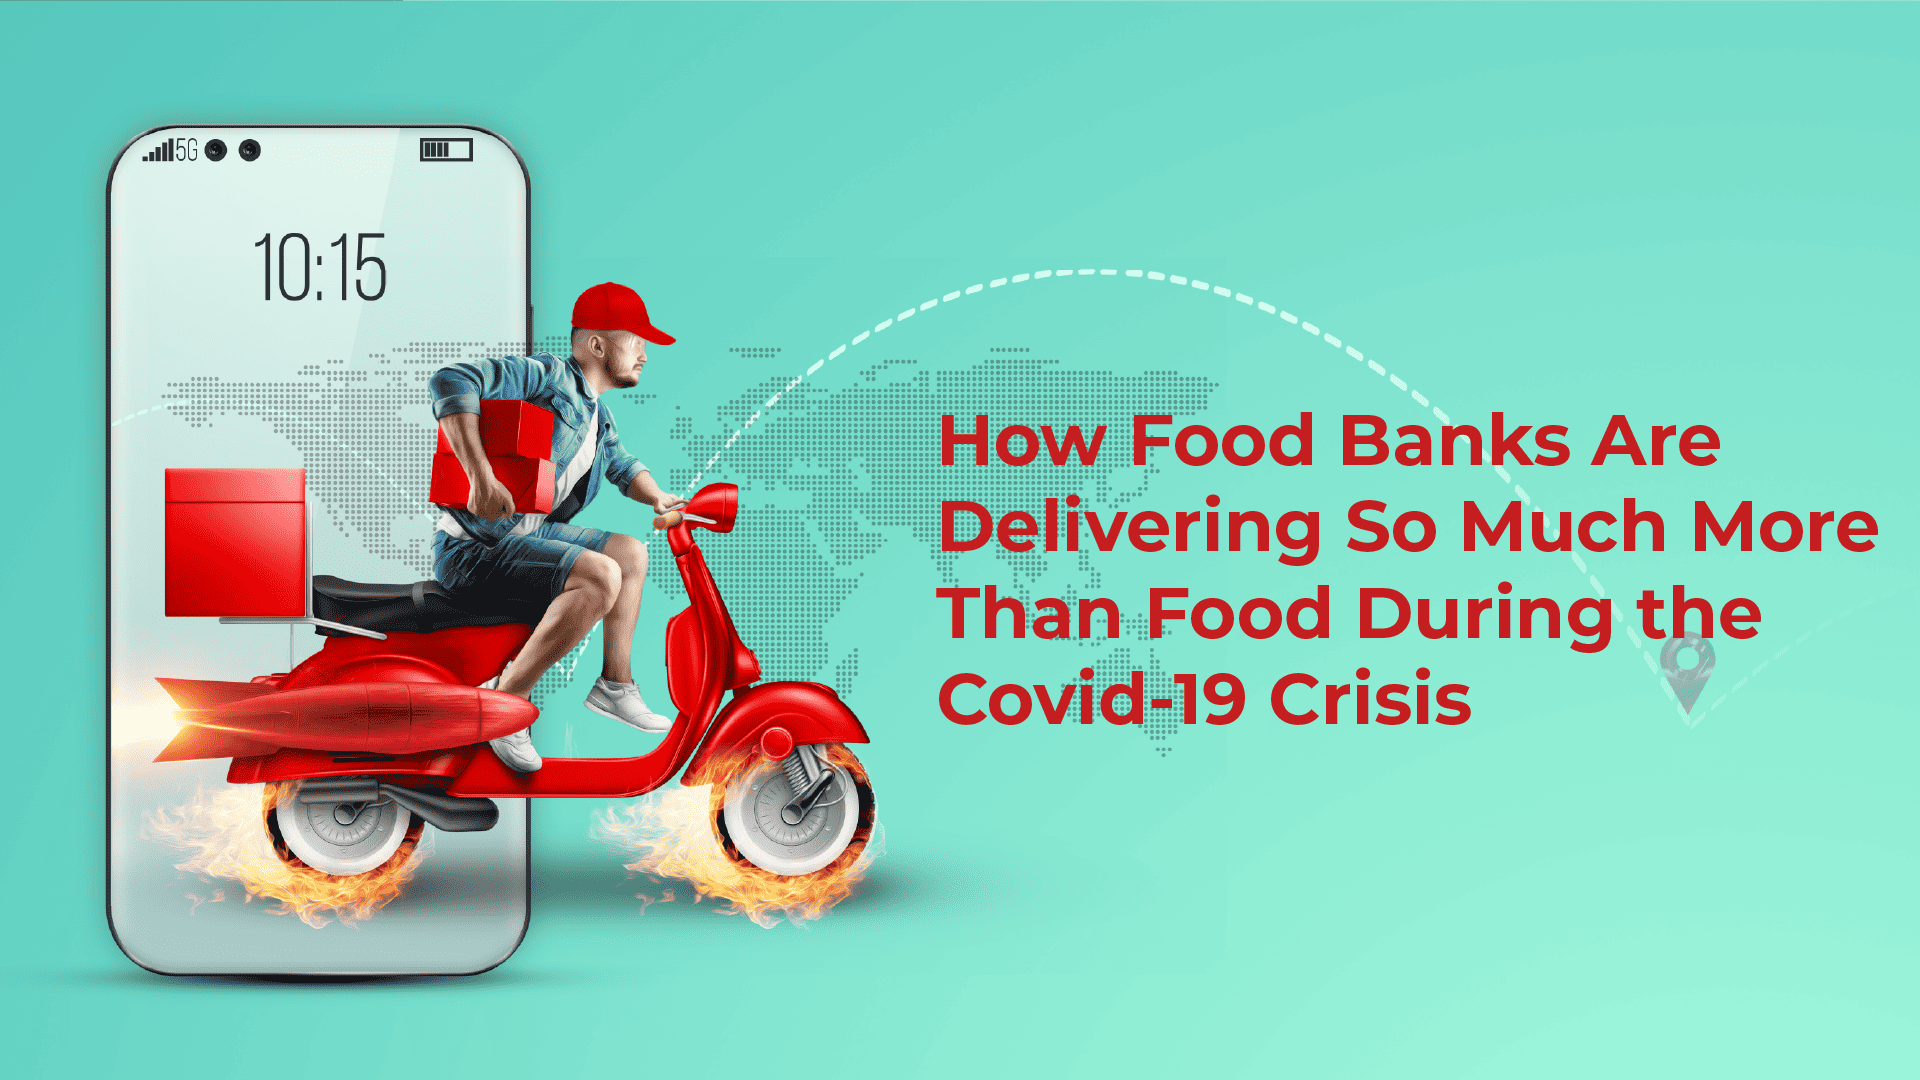 Food banks on the frontline of COVID-19 crisis